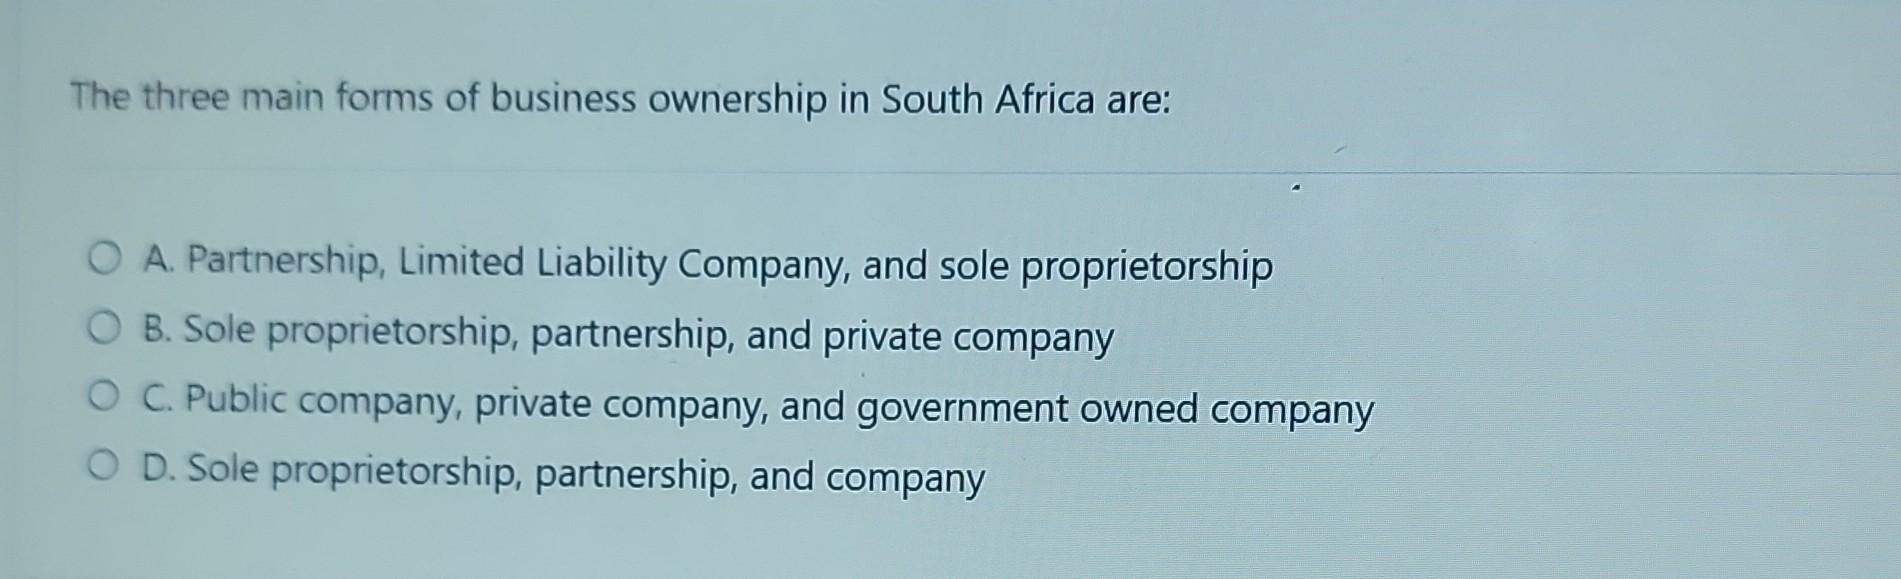 The three main forms of business ownership in South Africa are: O A. Partnership, Limited Liability Company,